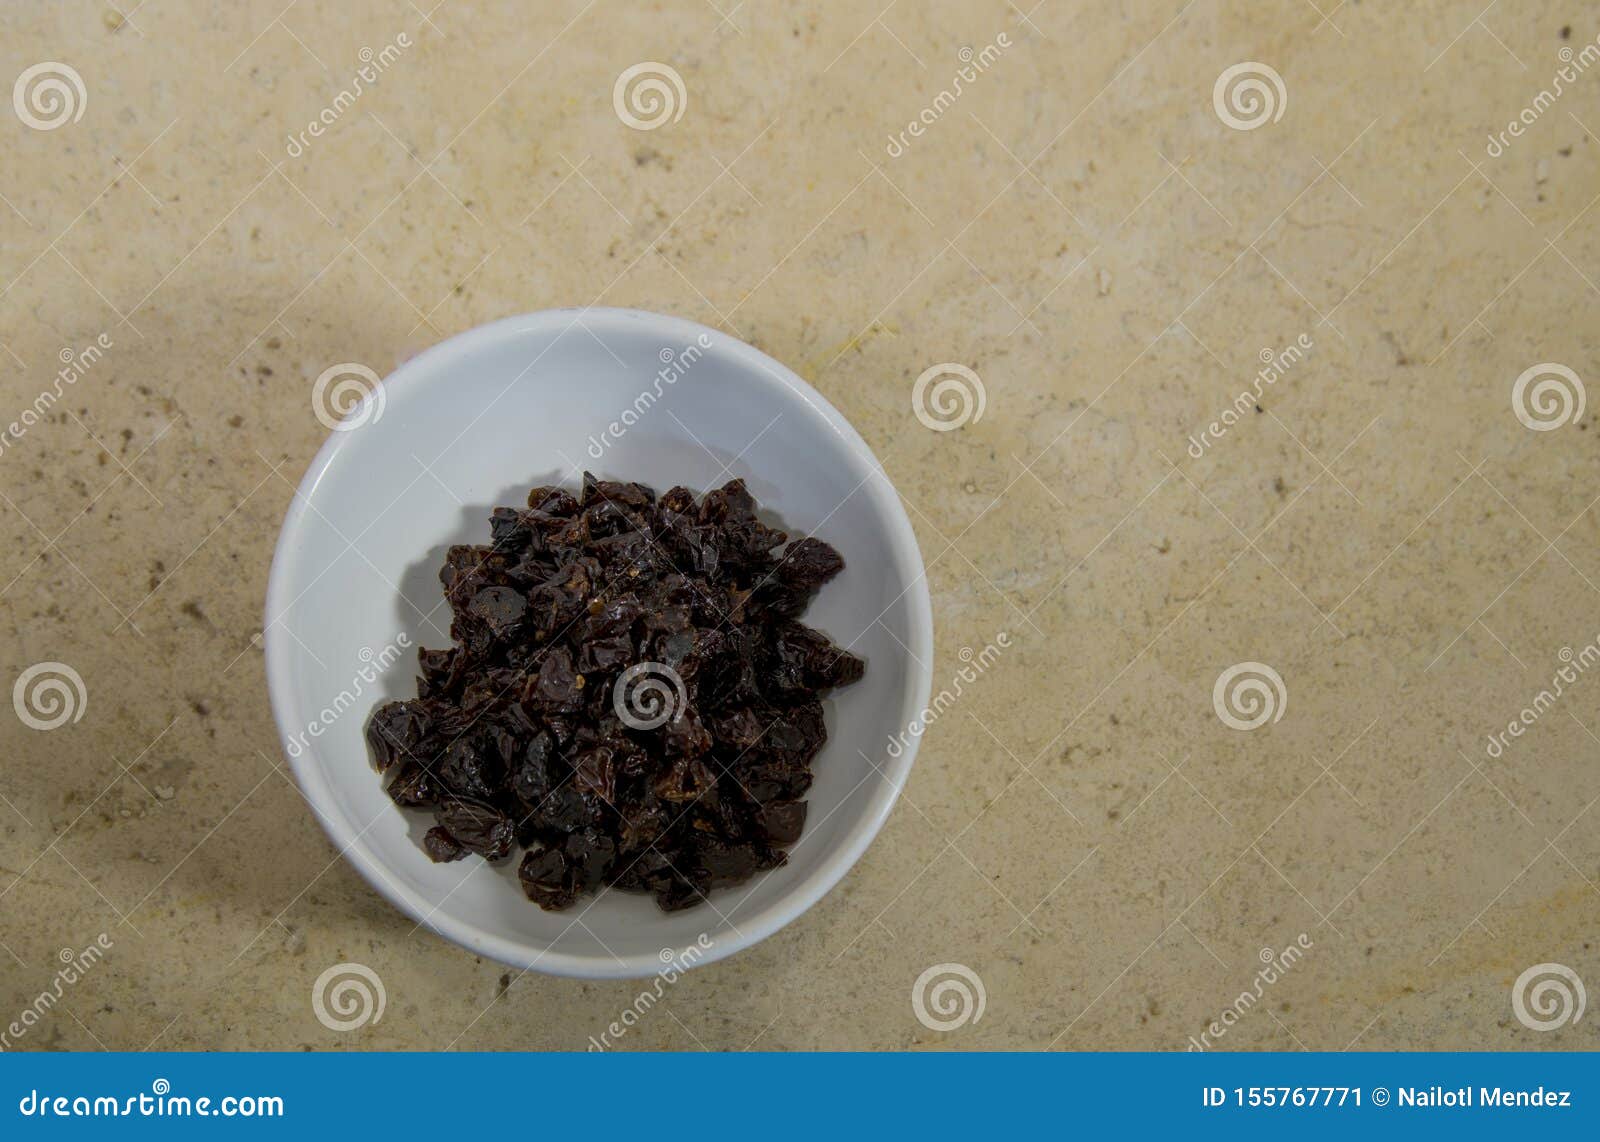 raisins on white plate, ingredient of & x22;chile en nogada& x22;, typical dish of gastronomy in puebla, mexico